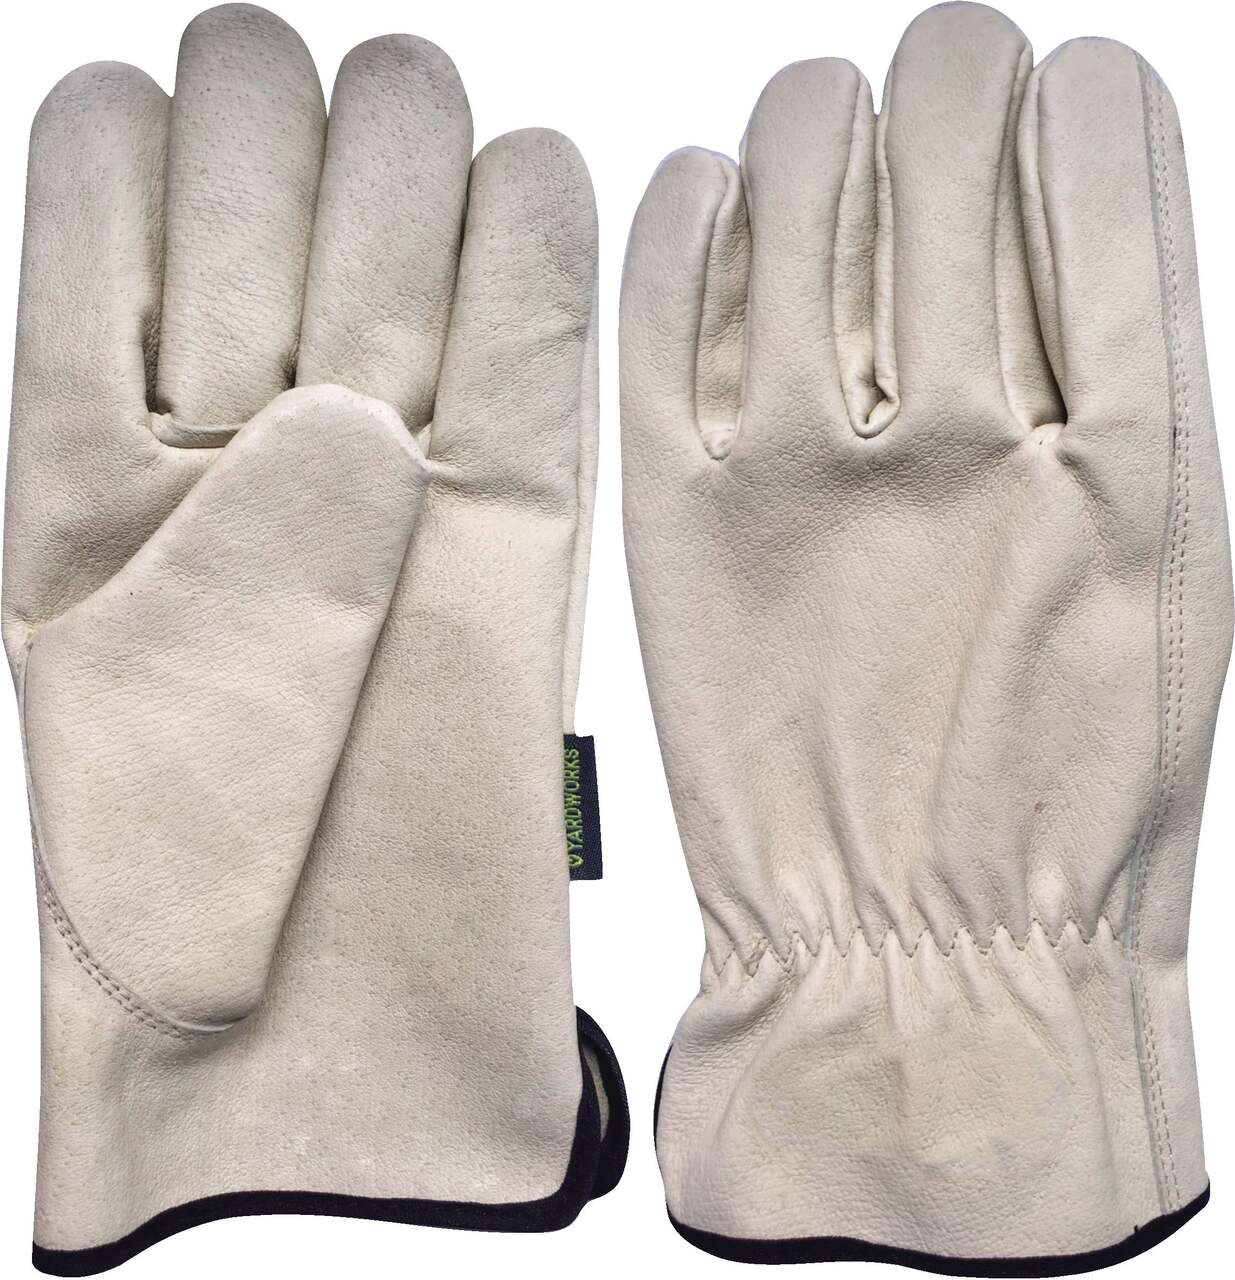 https://media-www.canadiantire.ca/product/seasonal-gardening/outdoor-tools/manual-lawn-garden-tools/0592889/yardworks-men-s-pigskin-work-gloves-fea7d060-7482-451d-a8c4-2f1bb289c460-jpgrendition.jpg?imdensity=1&imwidth=1244&impolicy=mZoom